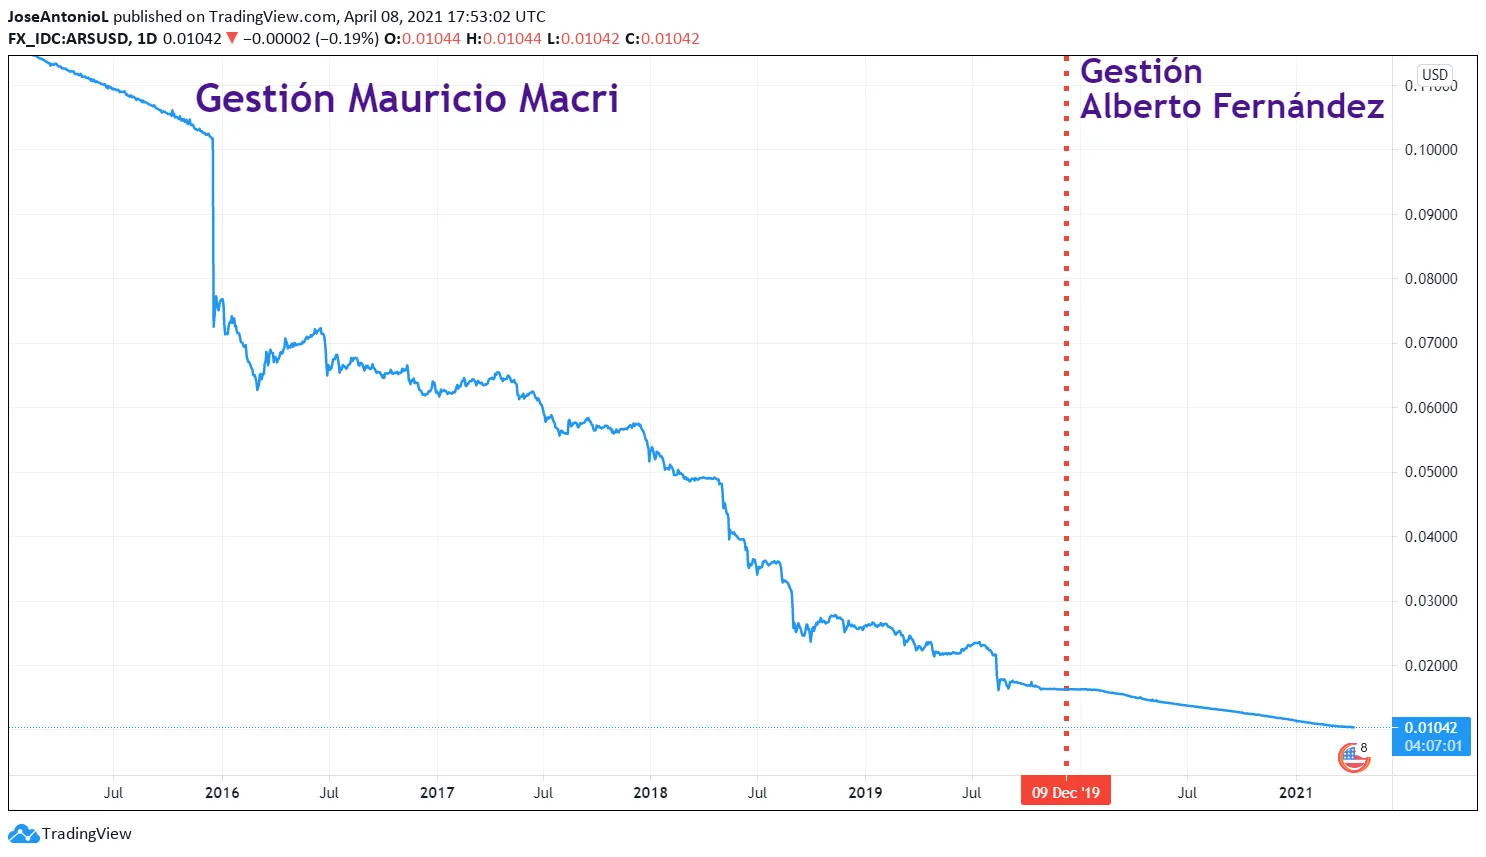 Evolution of the Argentine peso during the Macri and Fernandez administrations. Image: Tradingview